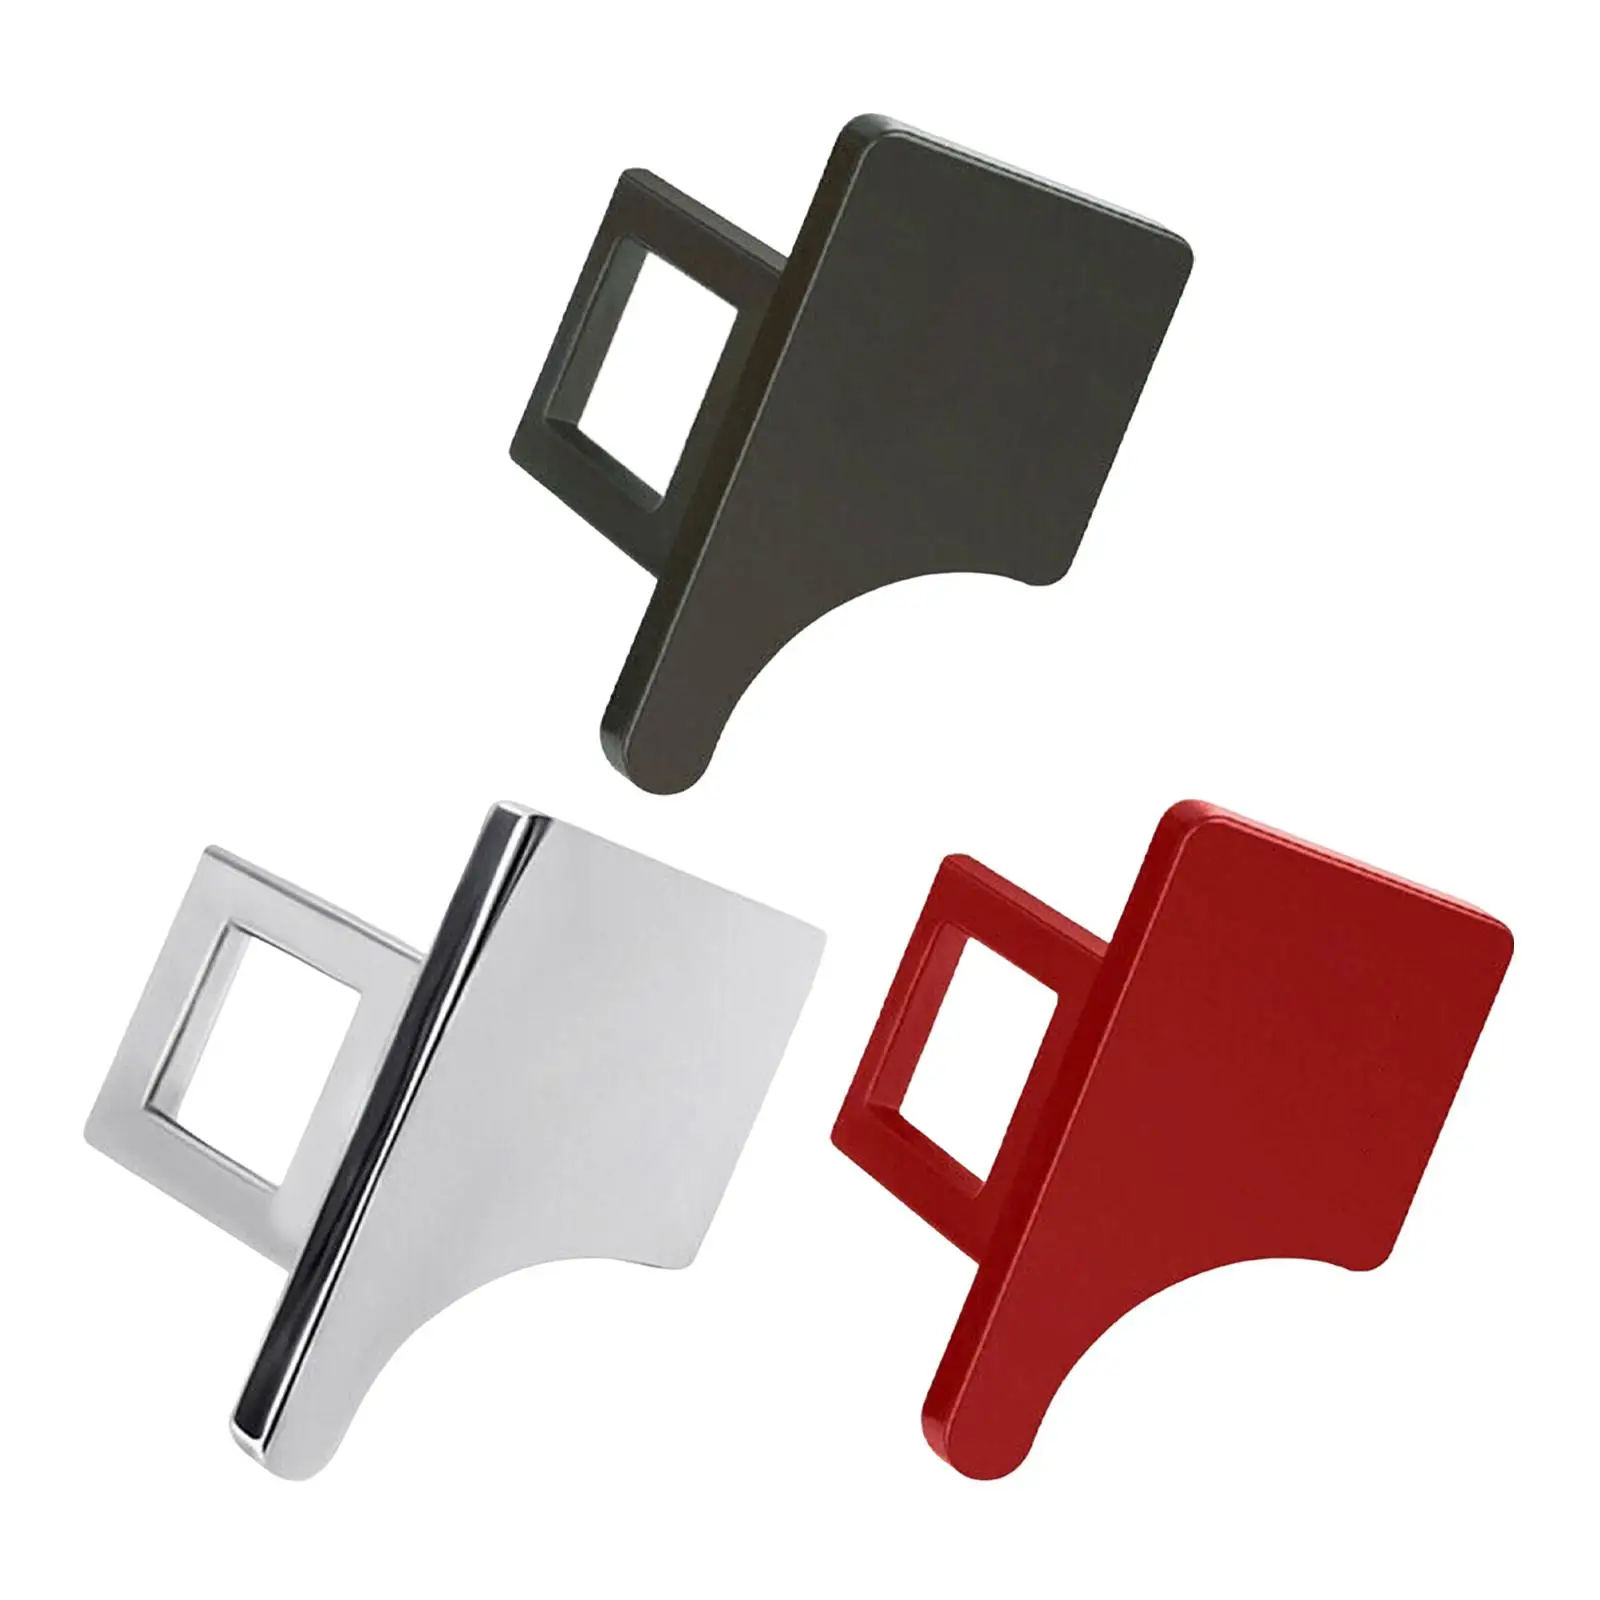 Car Seat Safety Belt Buckle Clip Metal Insert Card Replaces Hidden Seat Belt Buckle Clip for Byd Atto 3 Yuan Plus